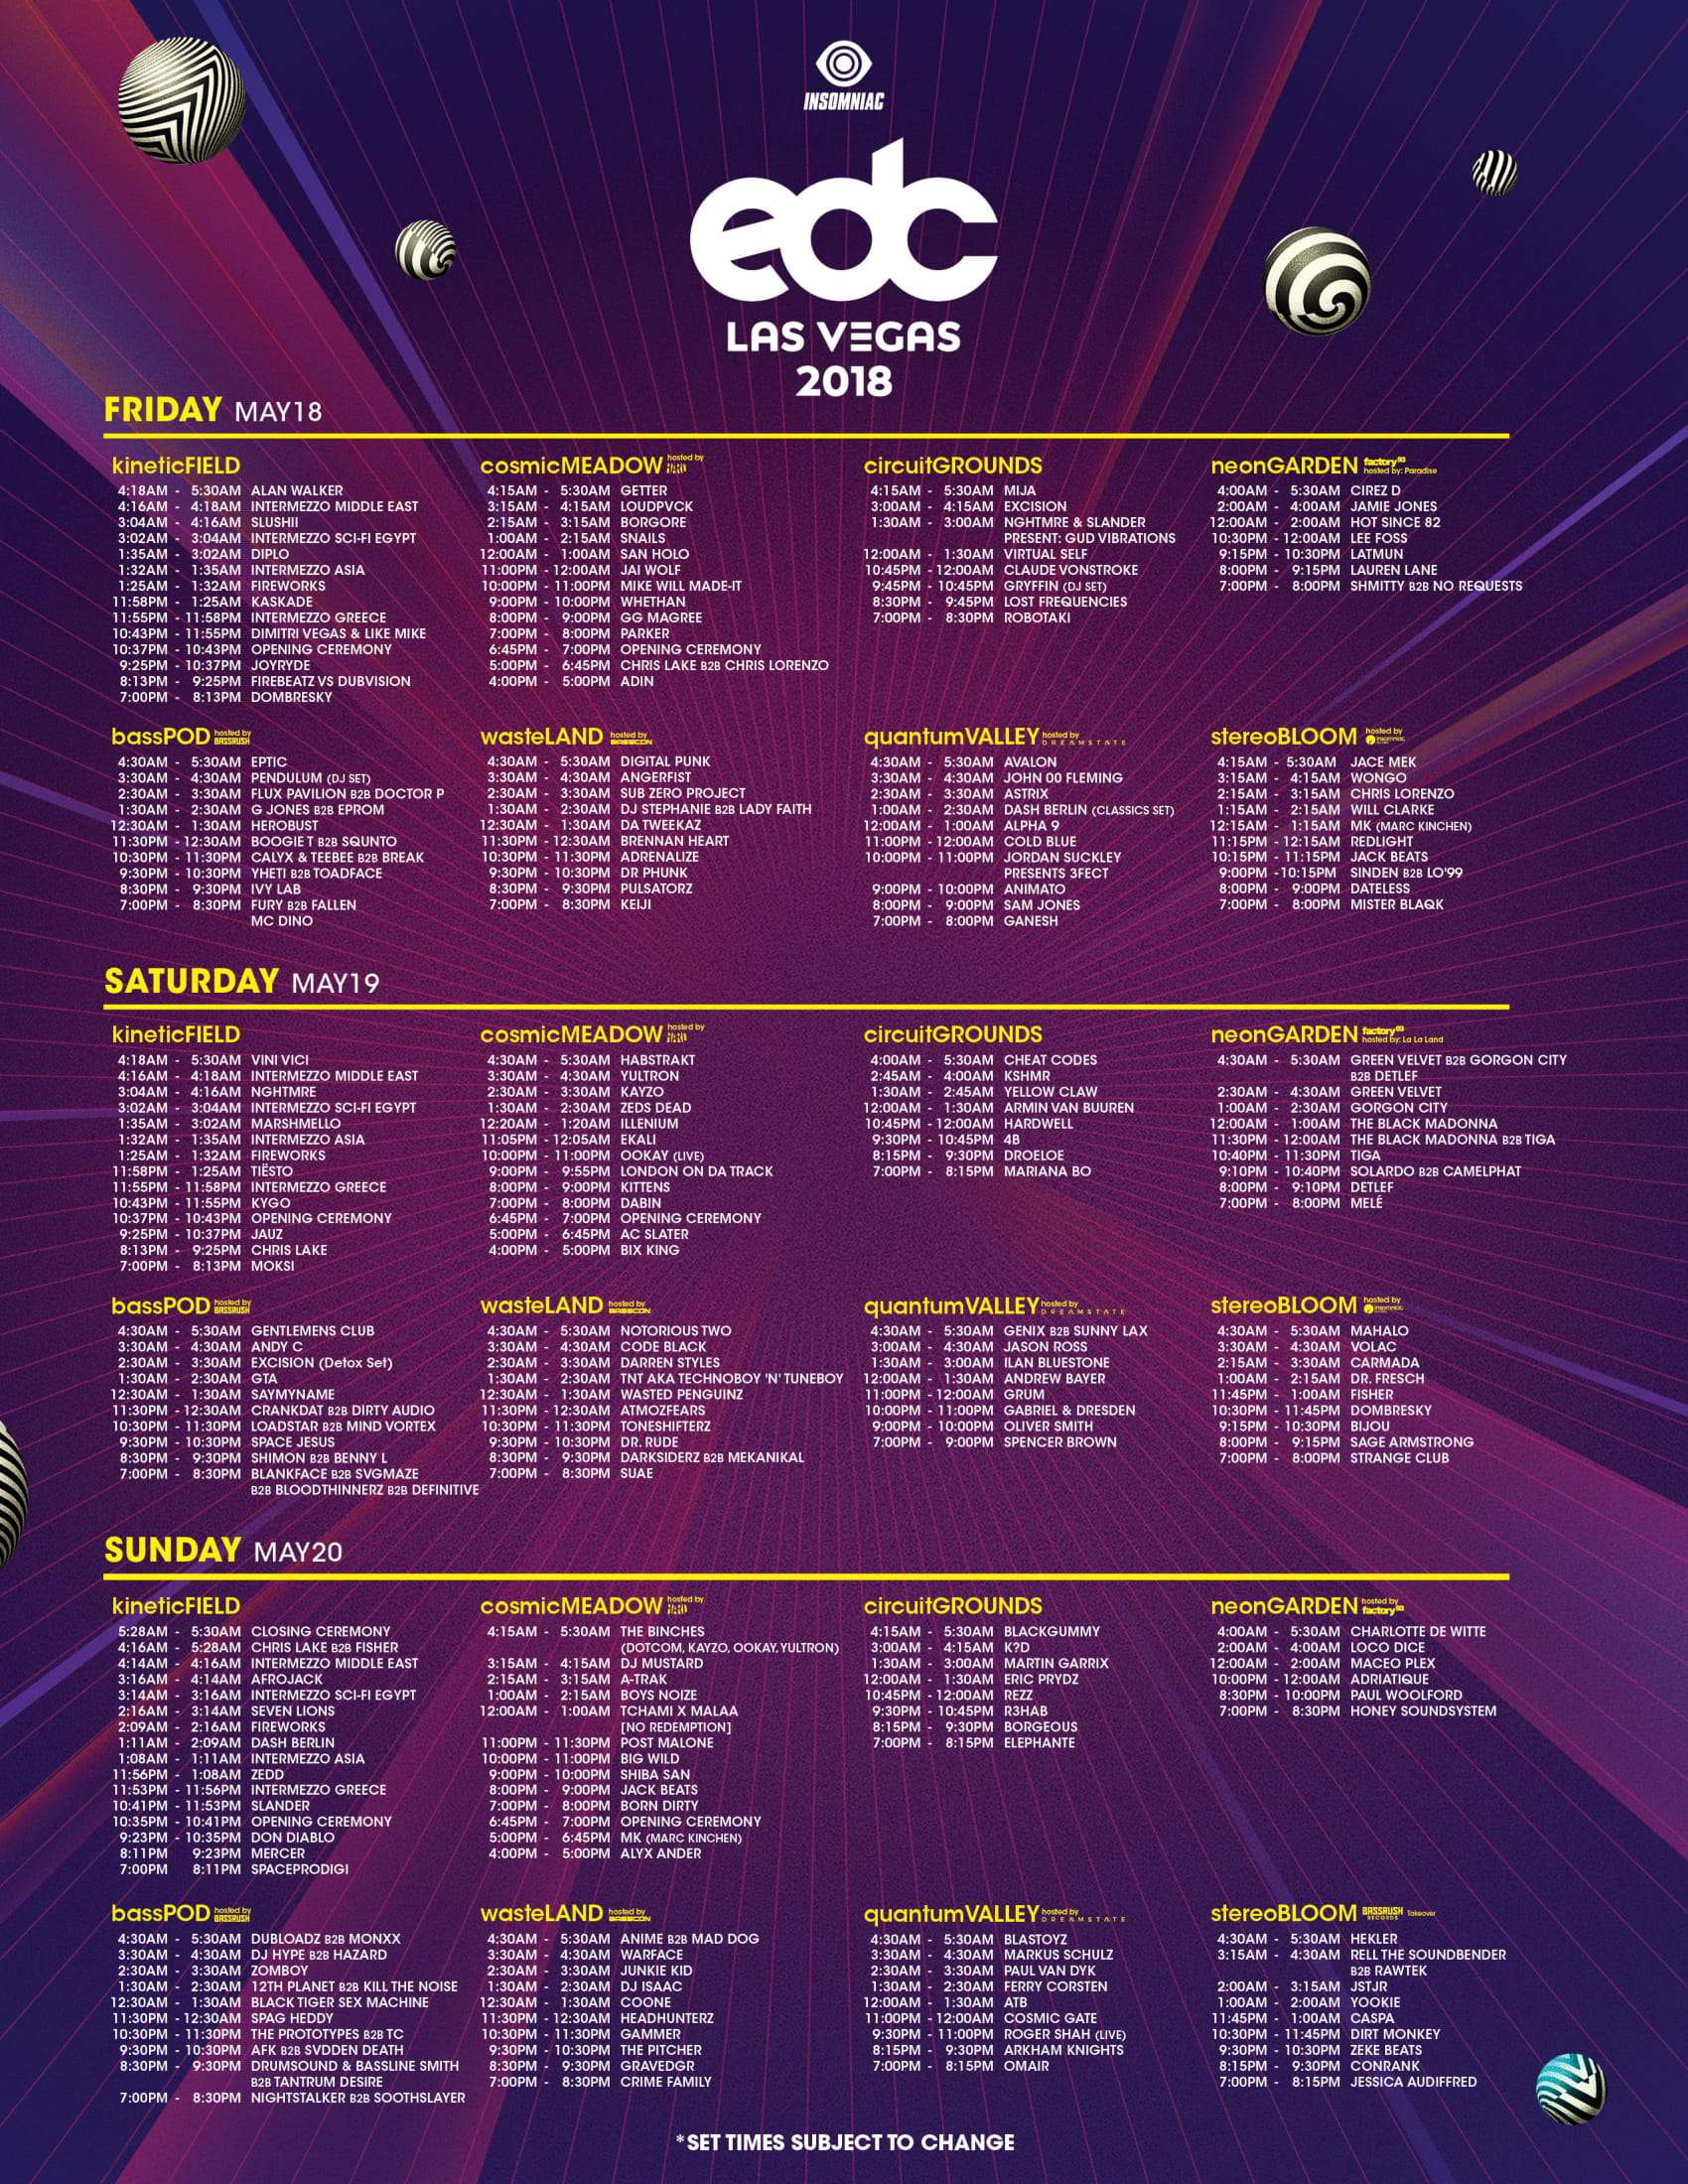 10 Sets Not To Miss At EDC Las Vegas | Your EDM